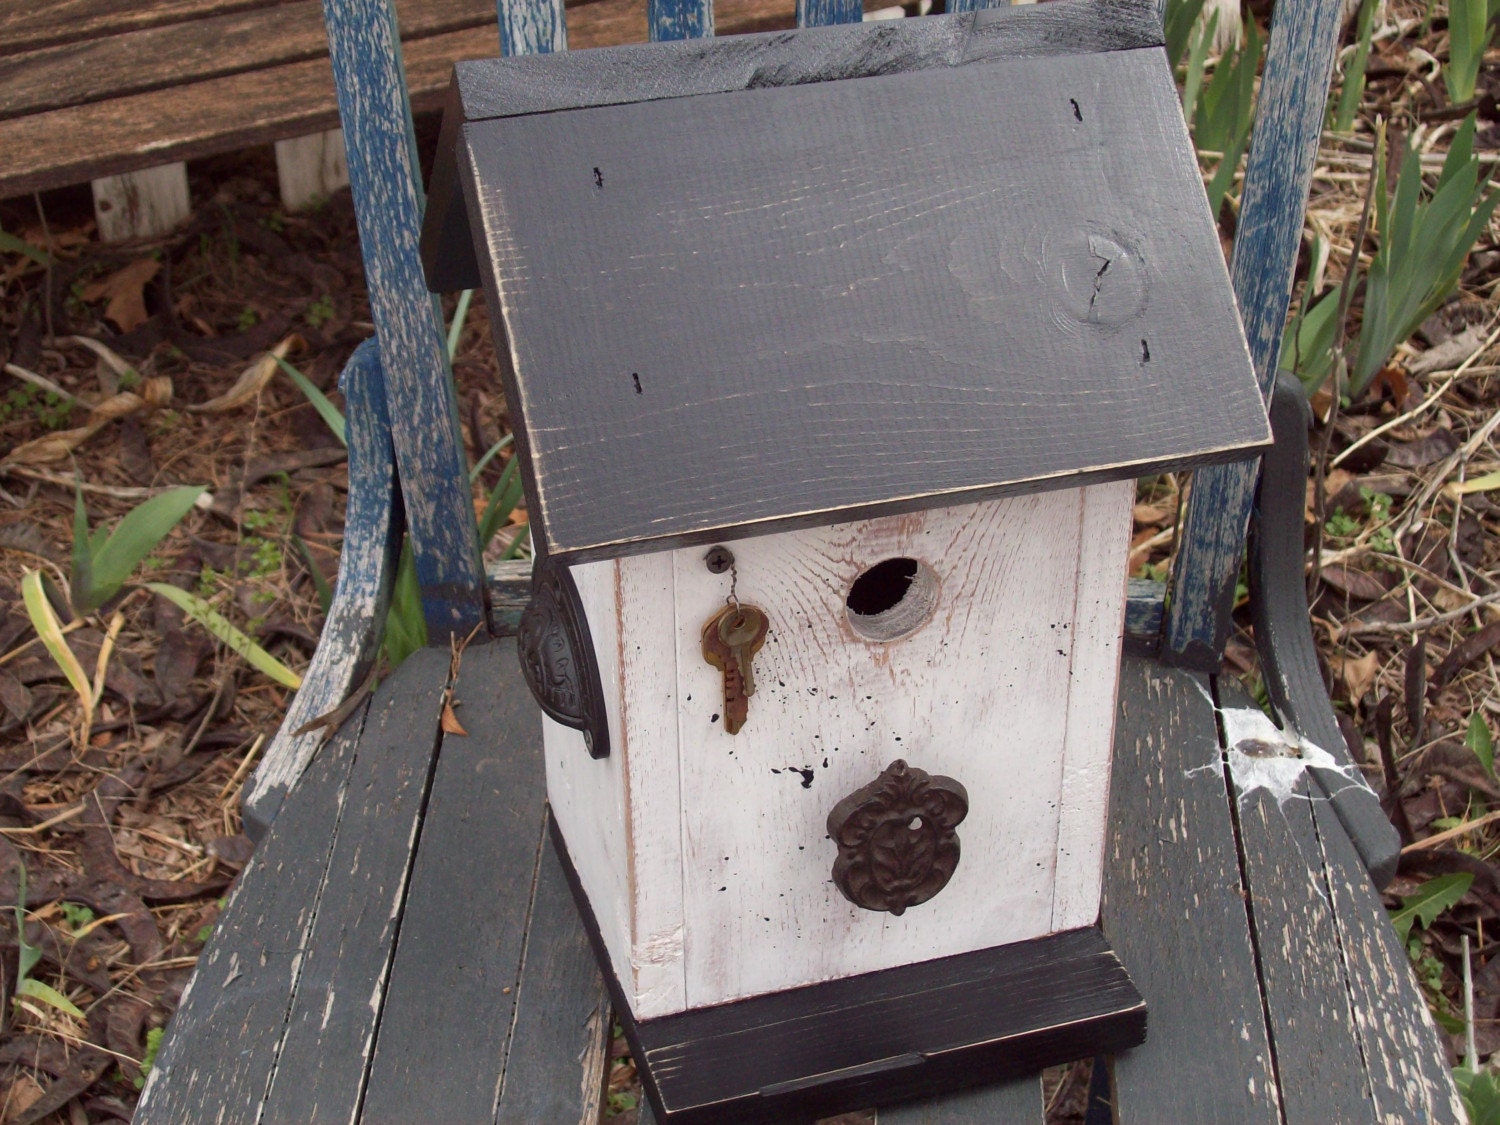 Shabby chic..Primitive..Vintage..Black white Birdhouse with drawer handles and old keys